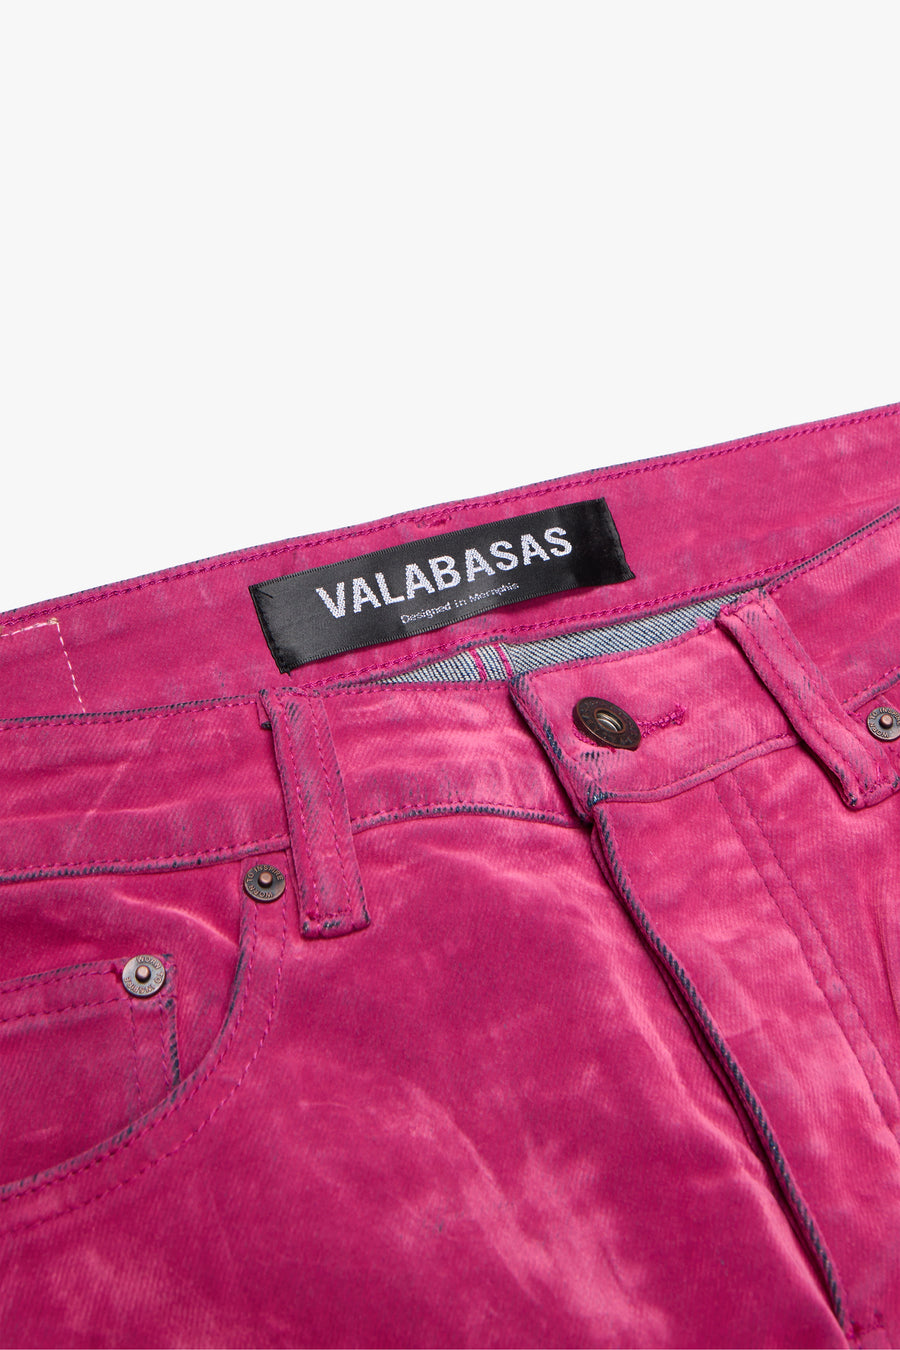 "LUXE" PINK SUEDE STACKED FLARE JEAN